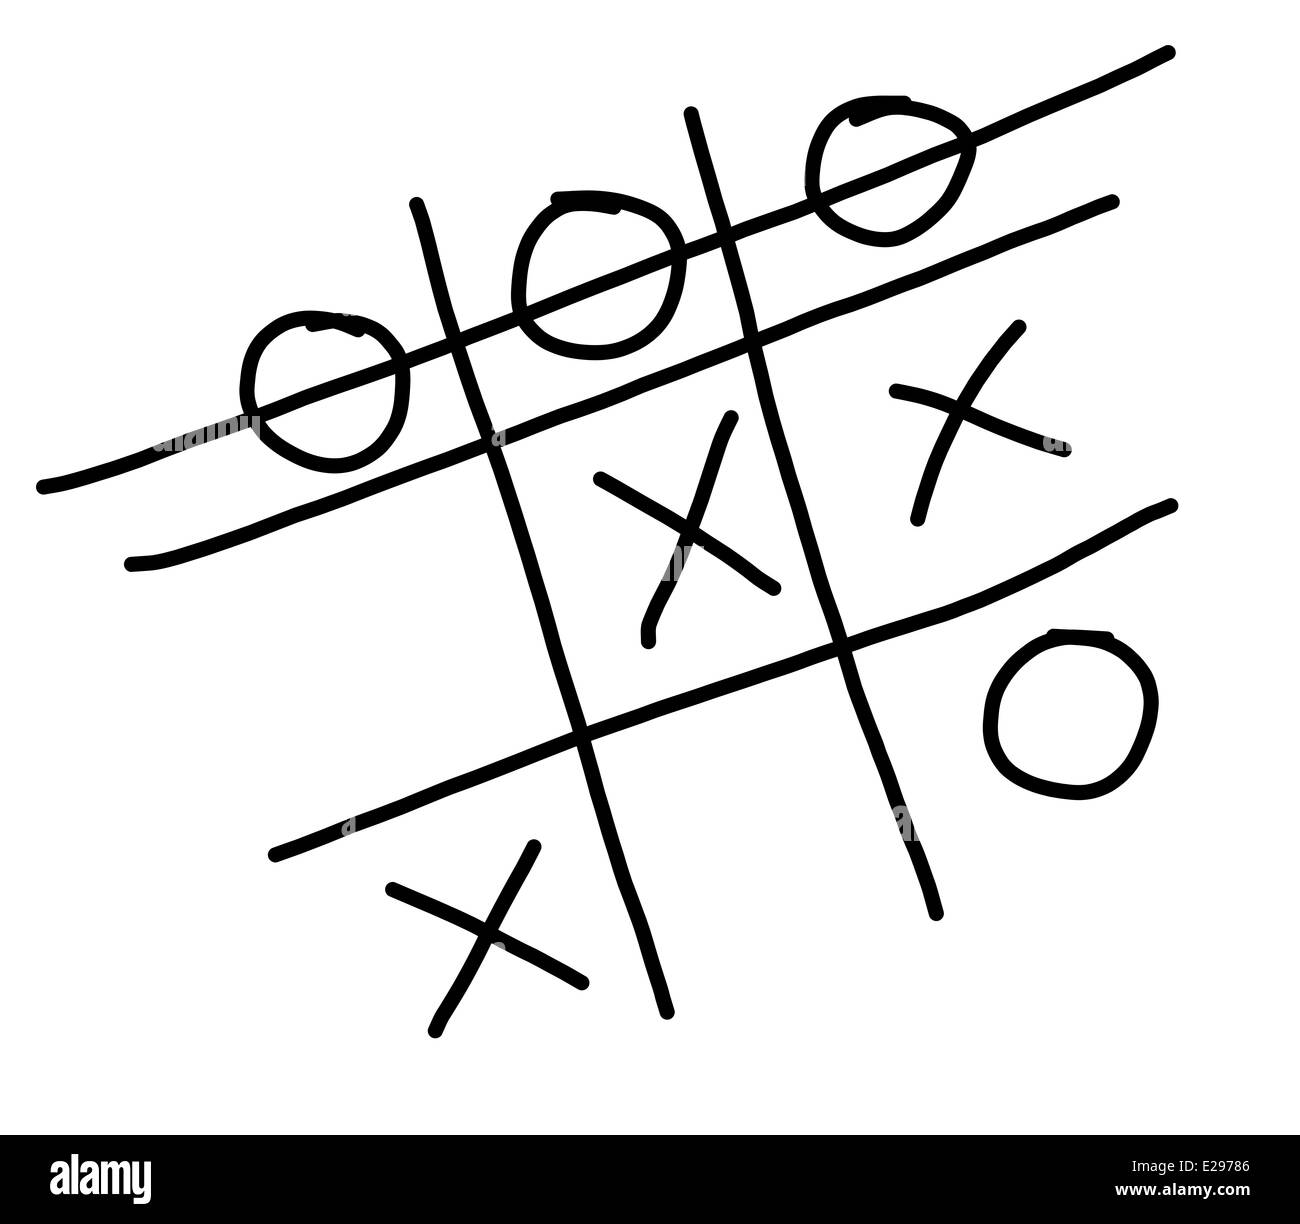 Illustration of a noughts and crosses game Stock Photo